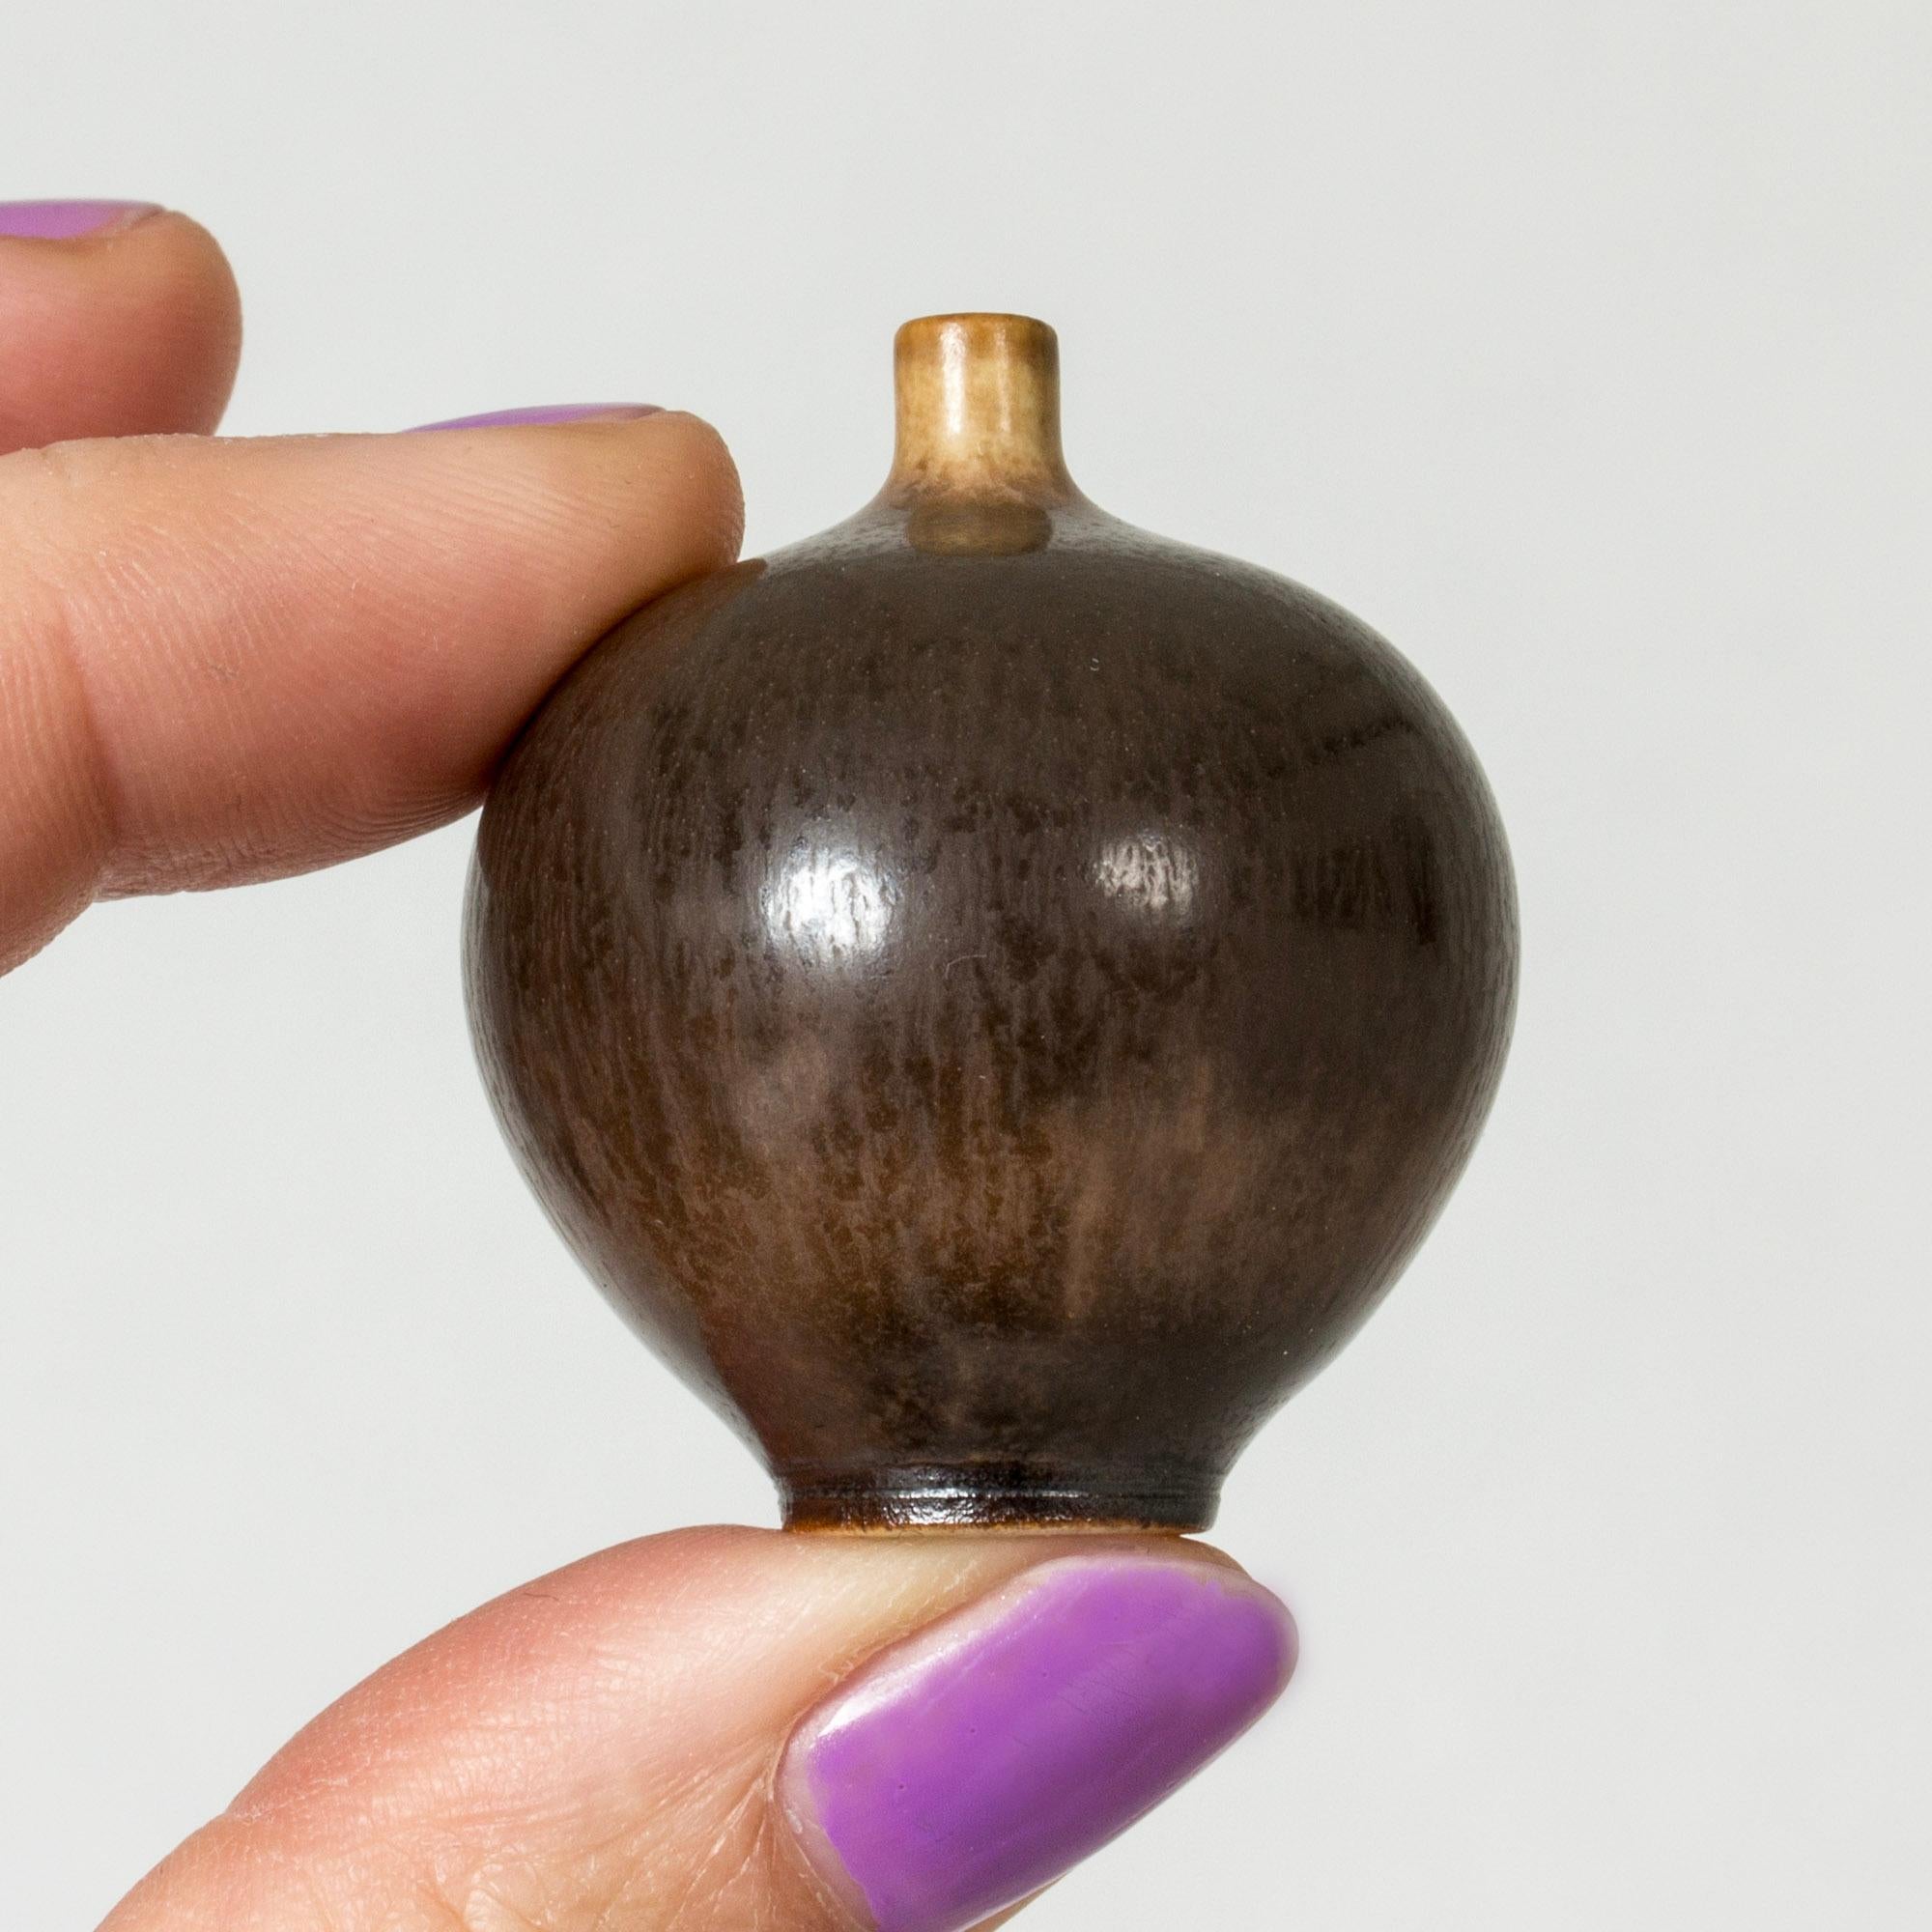 Miniature stoneware vase by Berndt Friberg in a rare, tiny size. Round form with dark brown somewhat glossy hare’s fur glaze.

Berndt Friberg was a Swedish ceramicist, renowned for his stoneware vases and vessels for Gustavsberg. His pure, composed